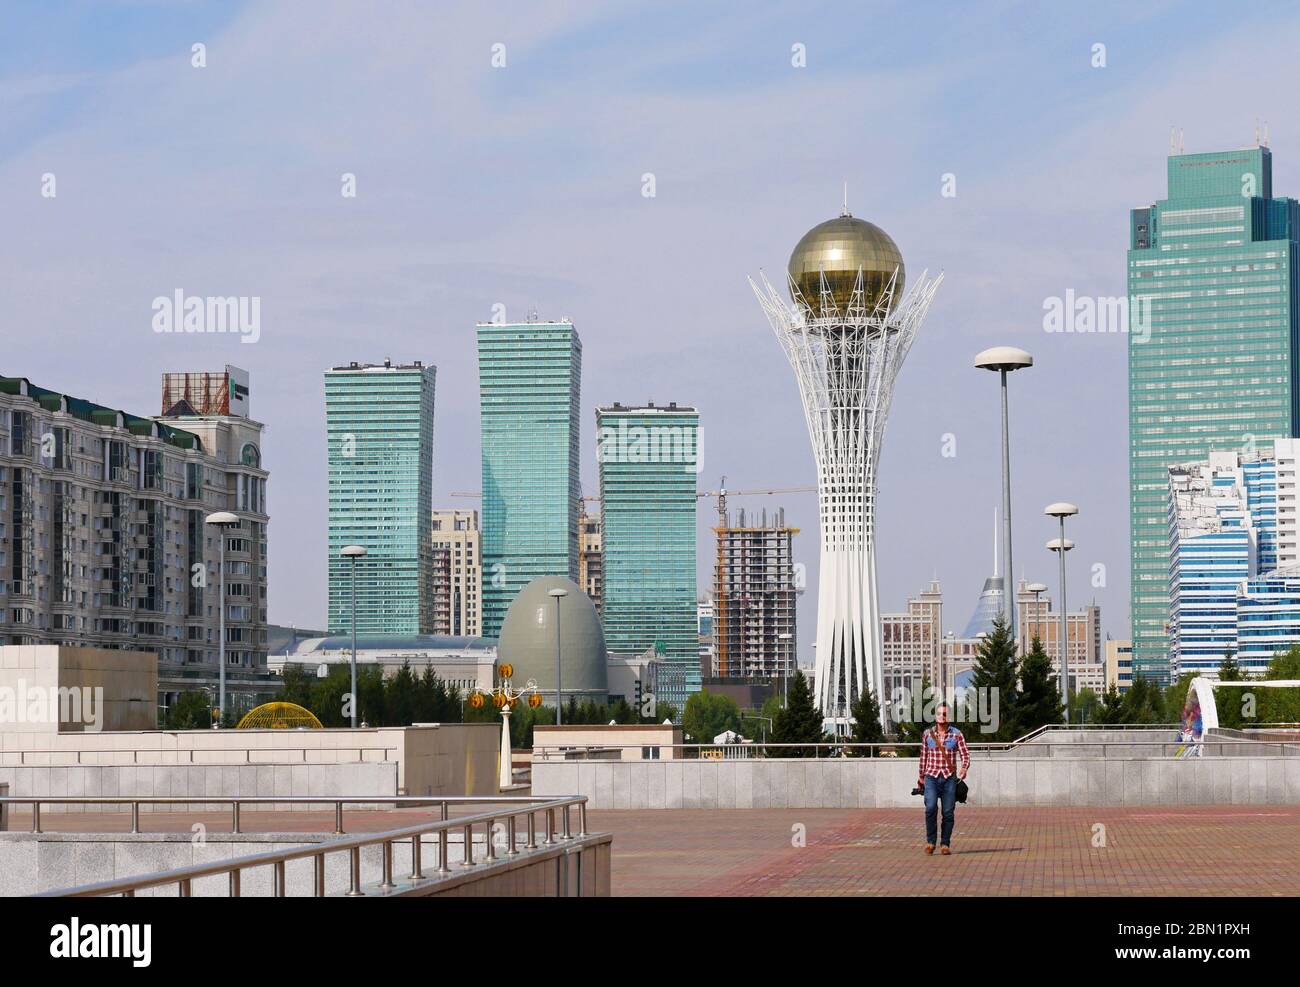 Man walking through Nur-Sultan (Astana) with the city skyline in the background Stock Photo